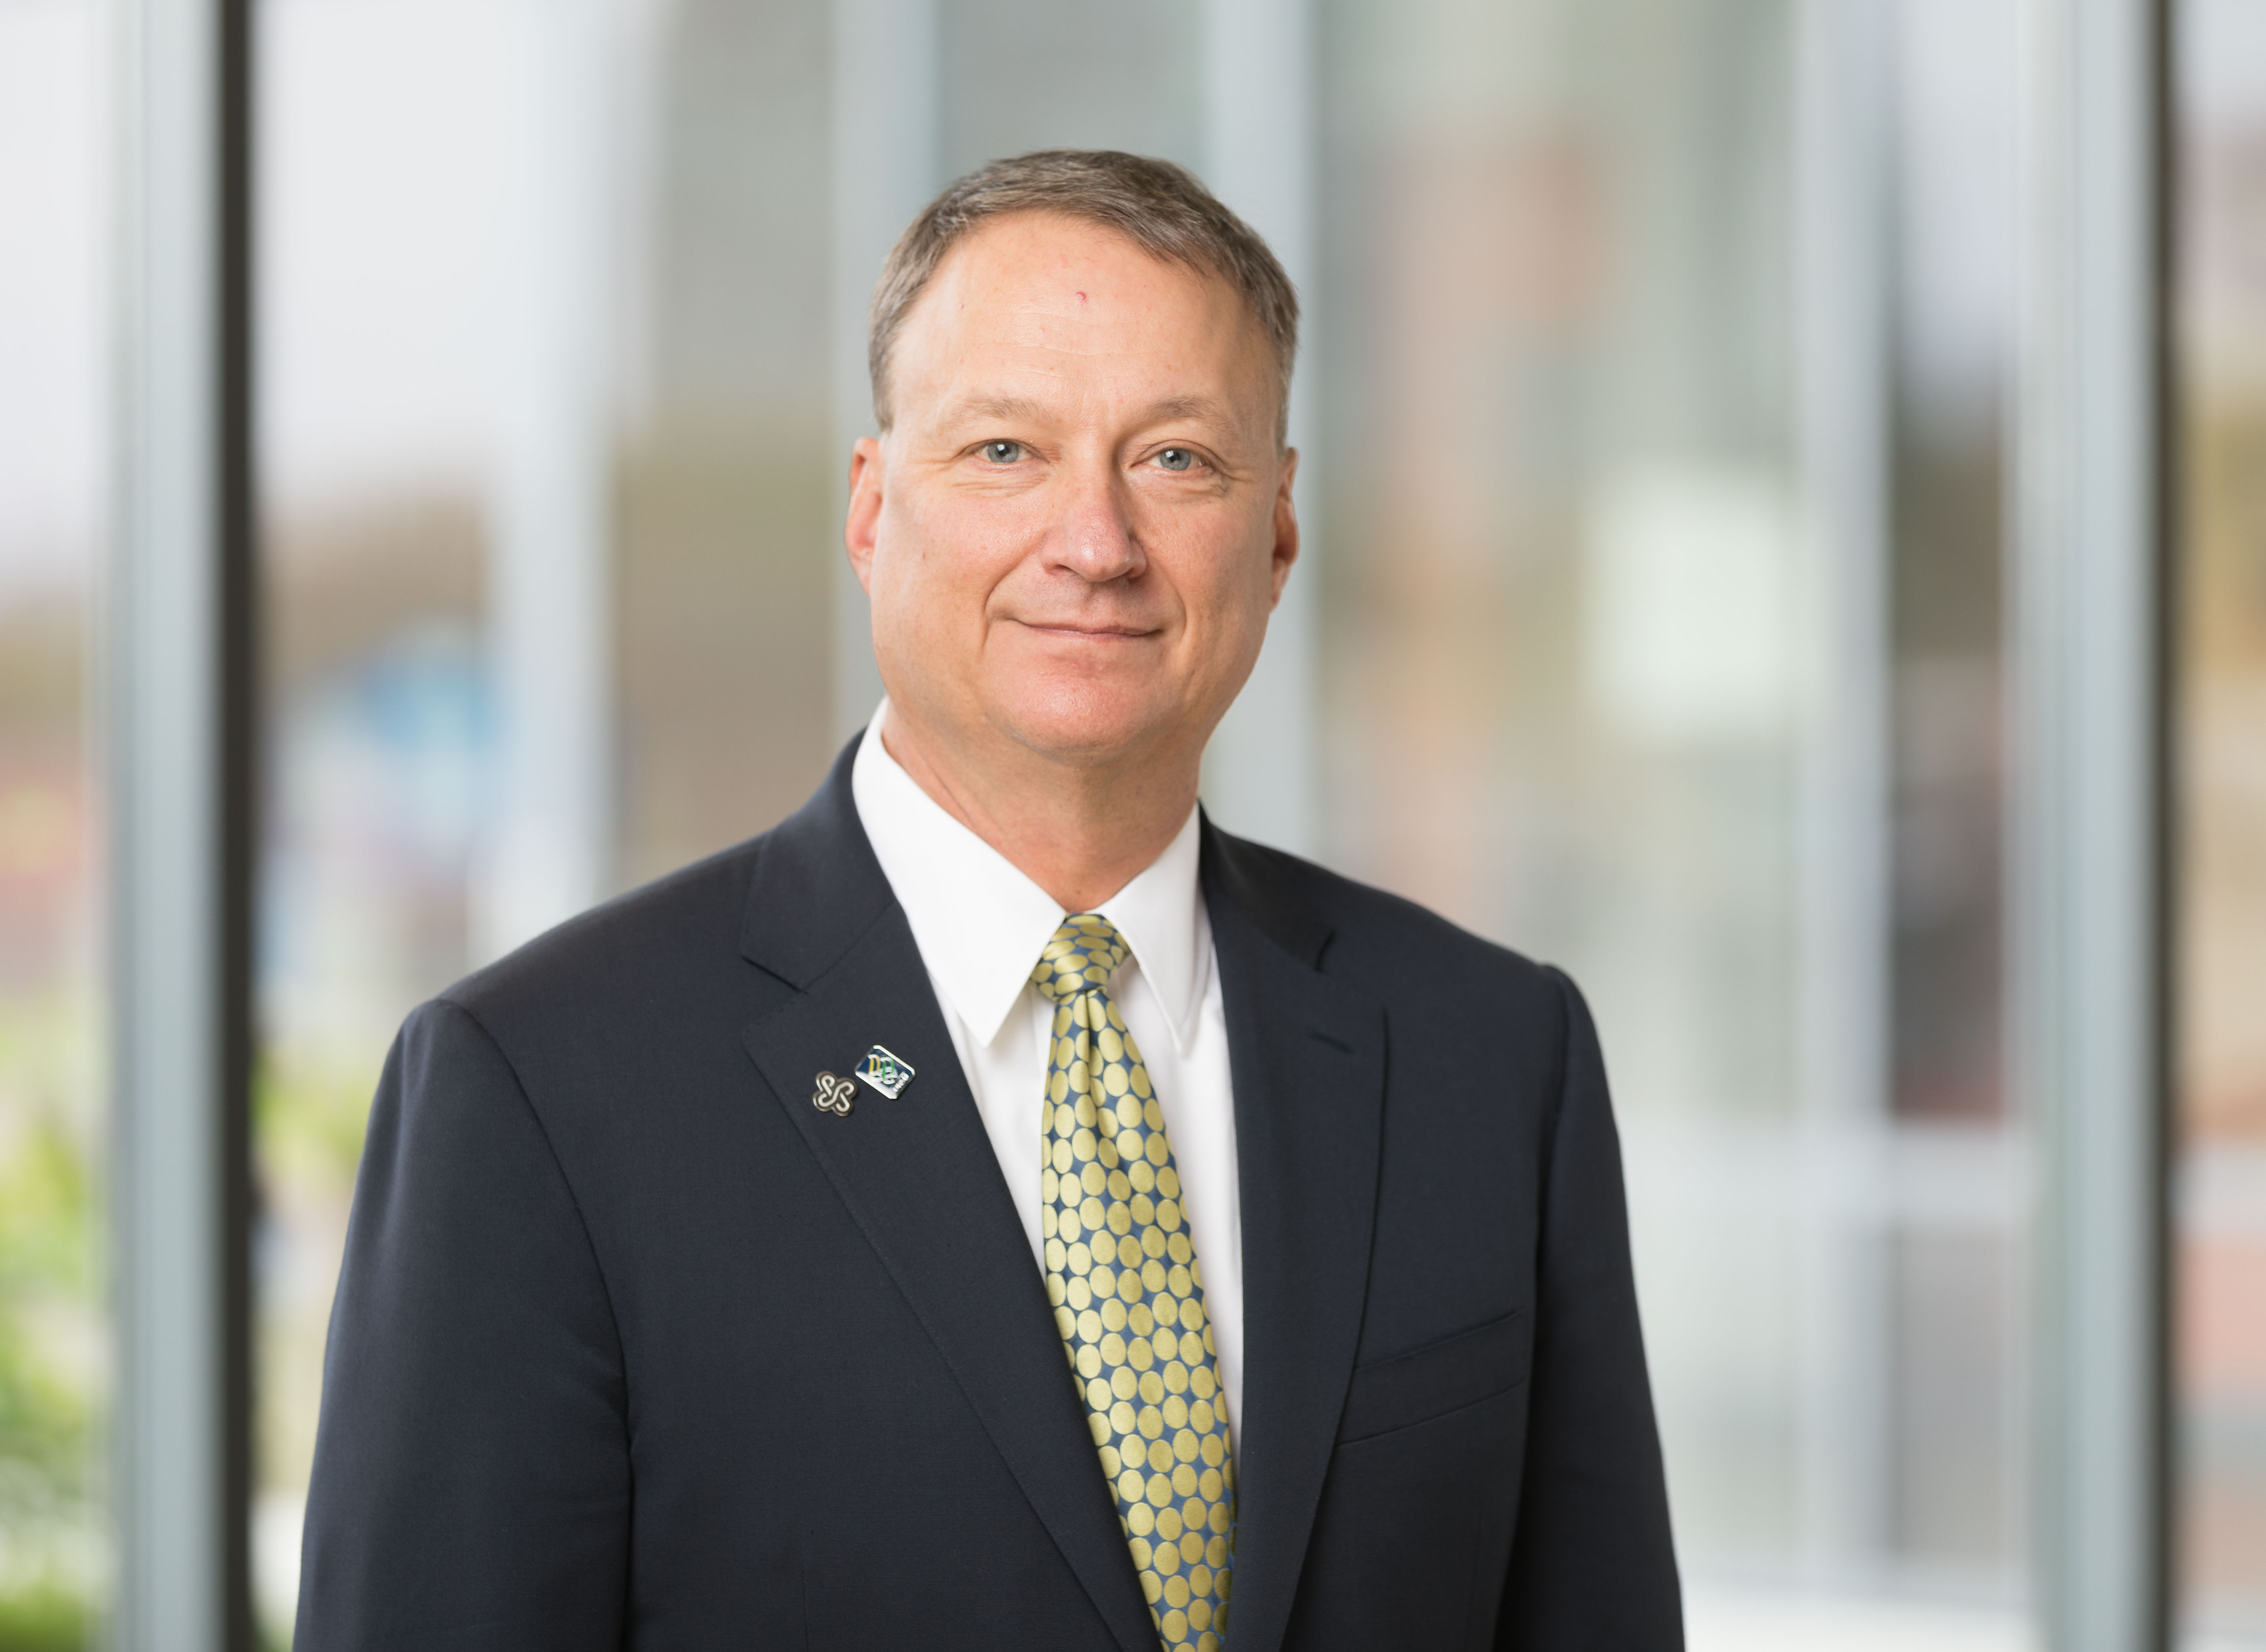 Photo of David Bangsberg, MD, MPH, wearing a suit and green and blue tie.